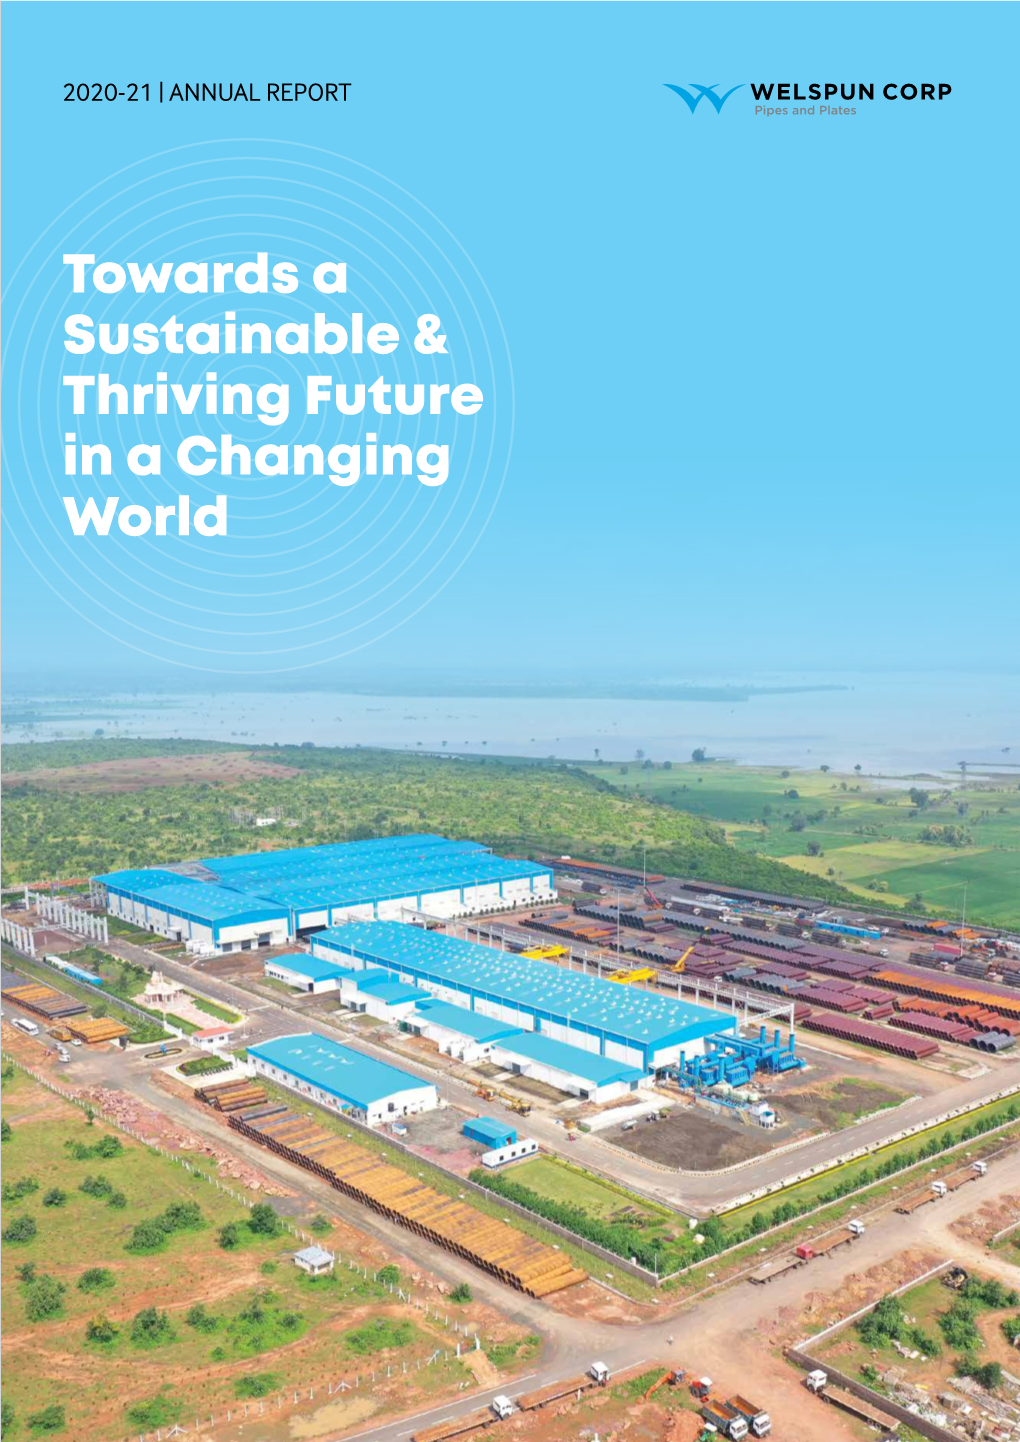 Towards a Sustainable & Thriving Future in a Changing World